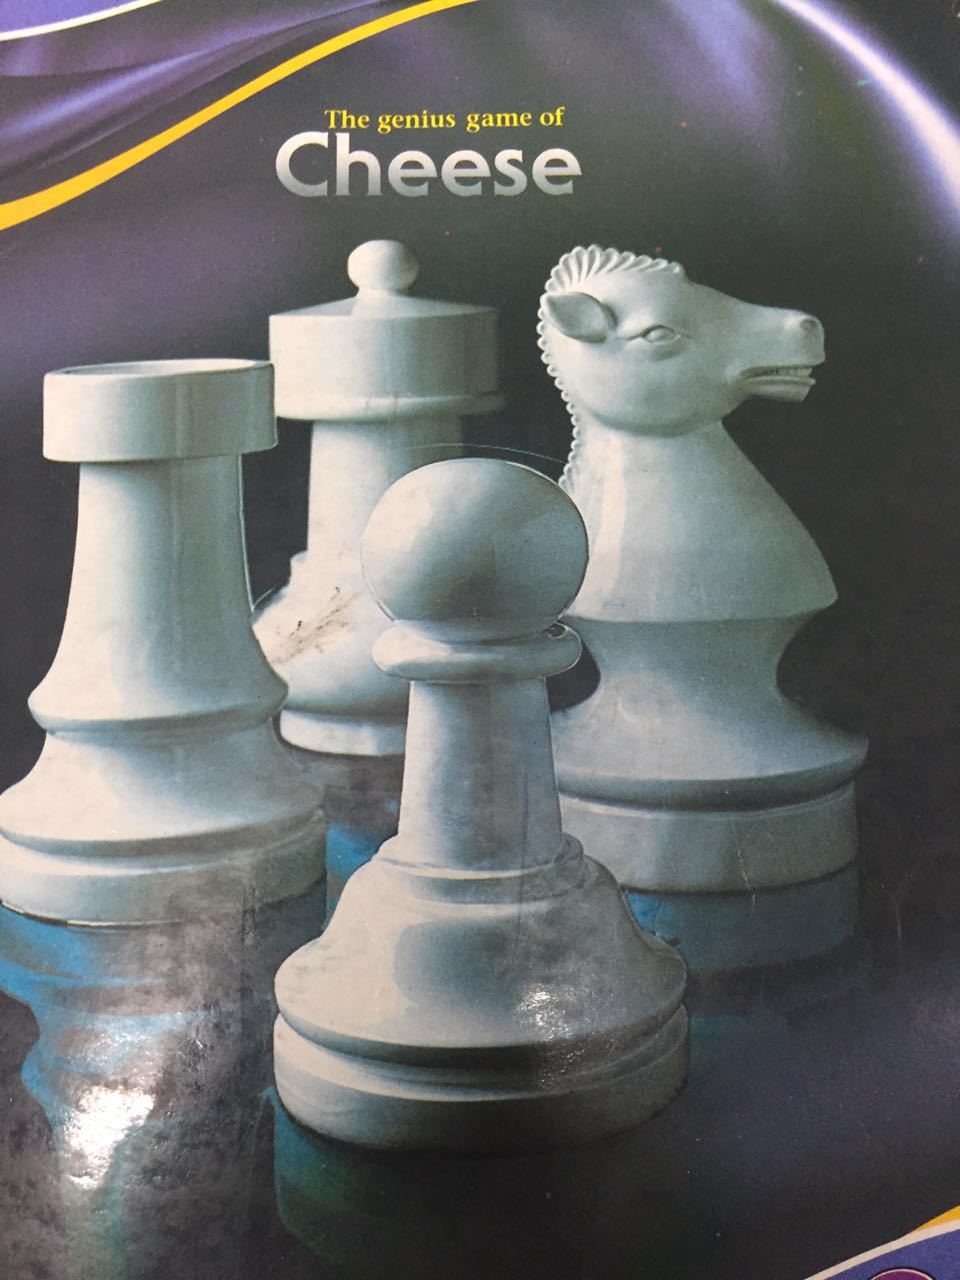 You need stratecheese to win - meme